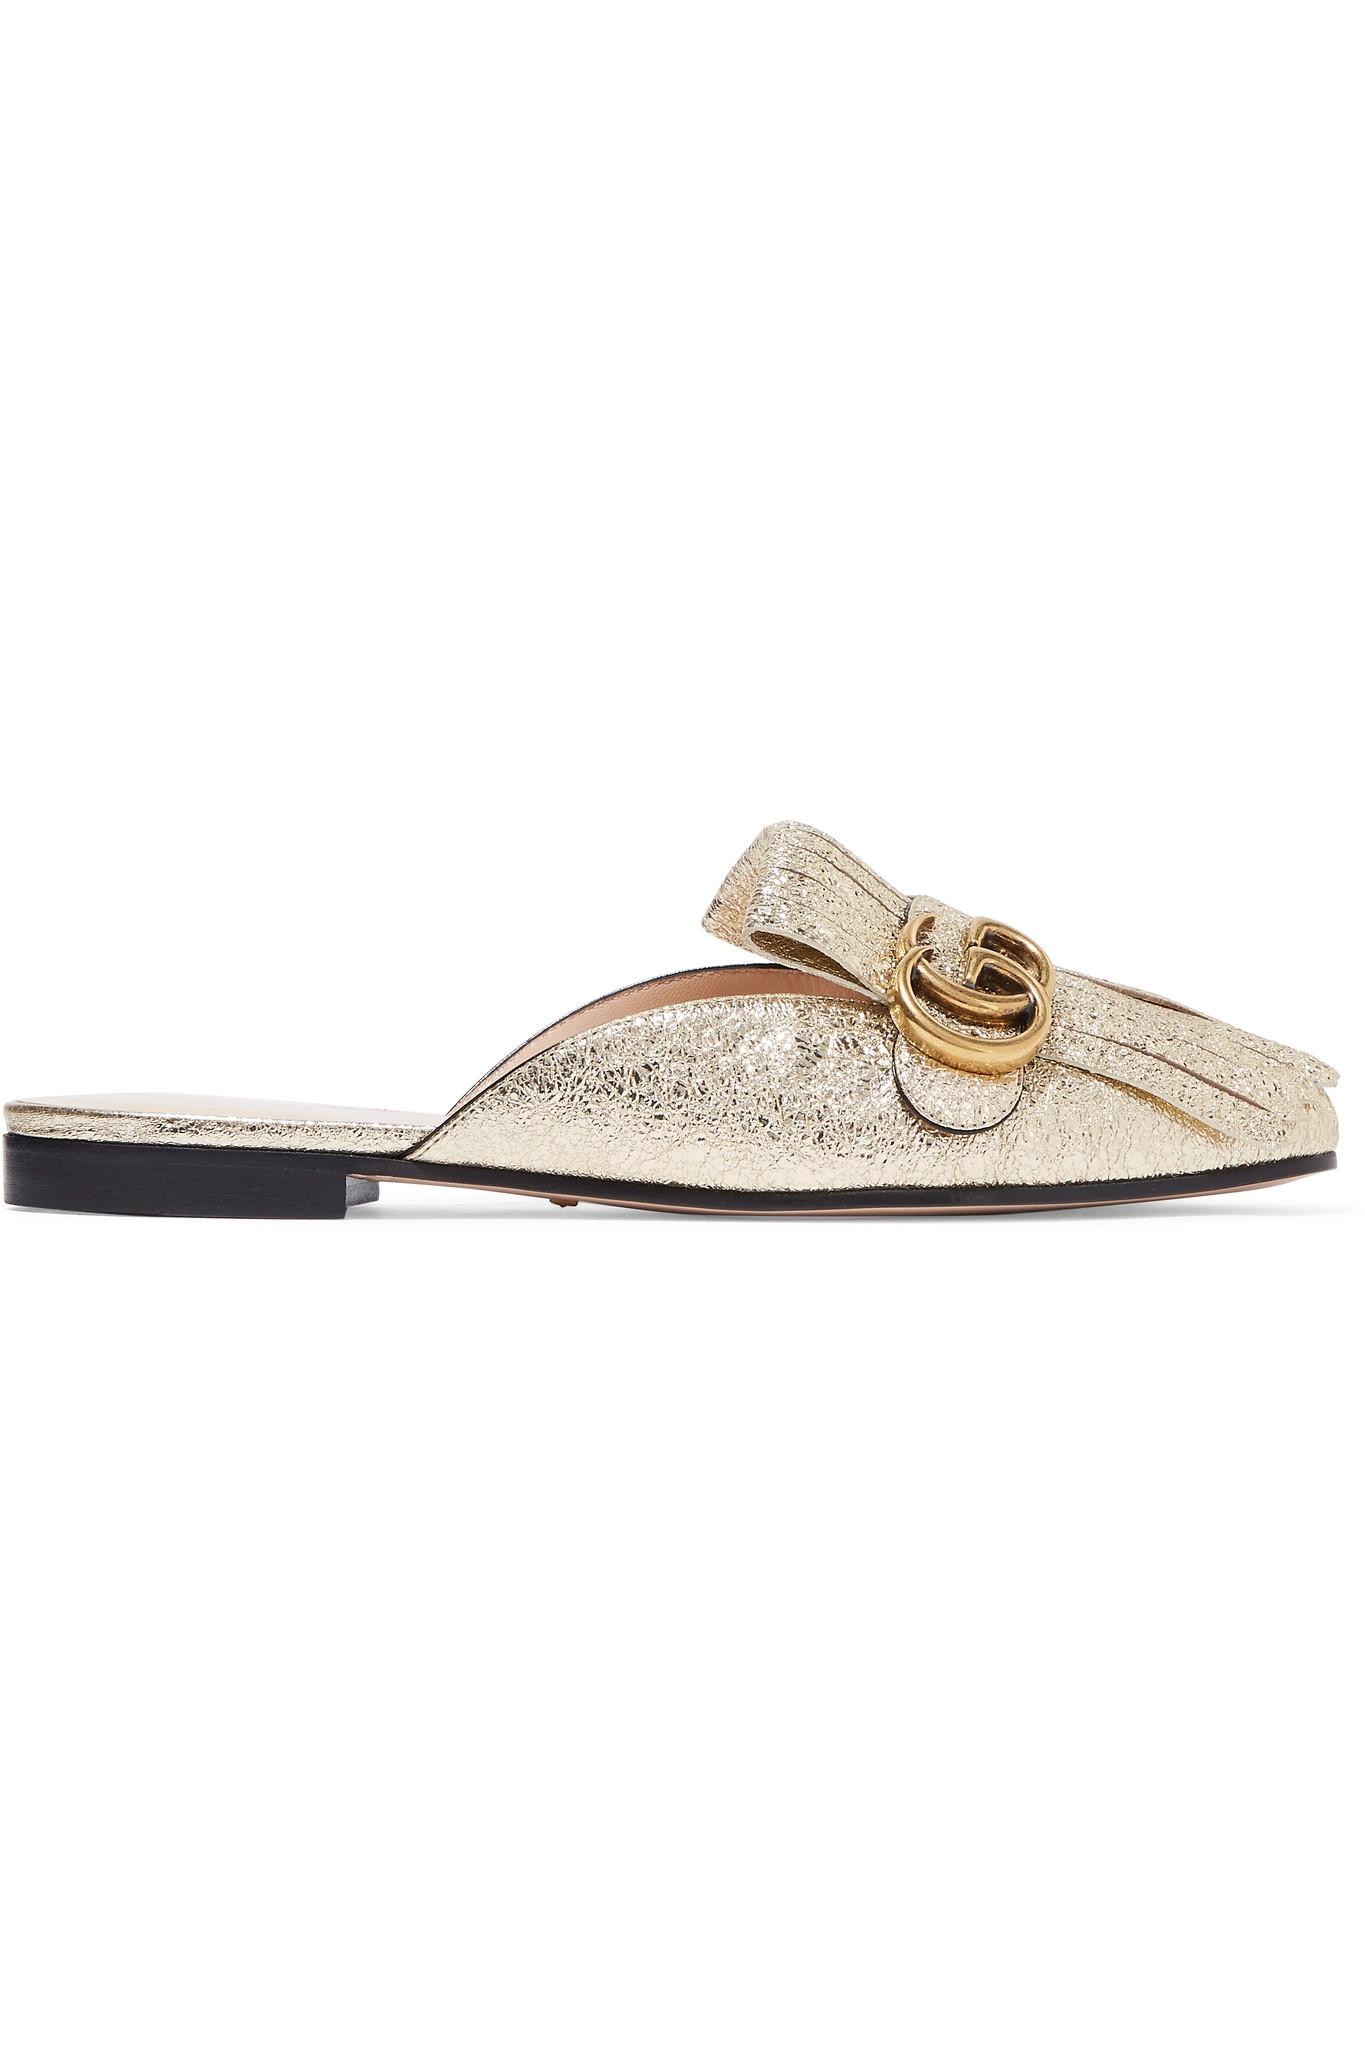 Lyst - Gucci Gold Leather Marmont Mules in Metallic